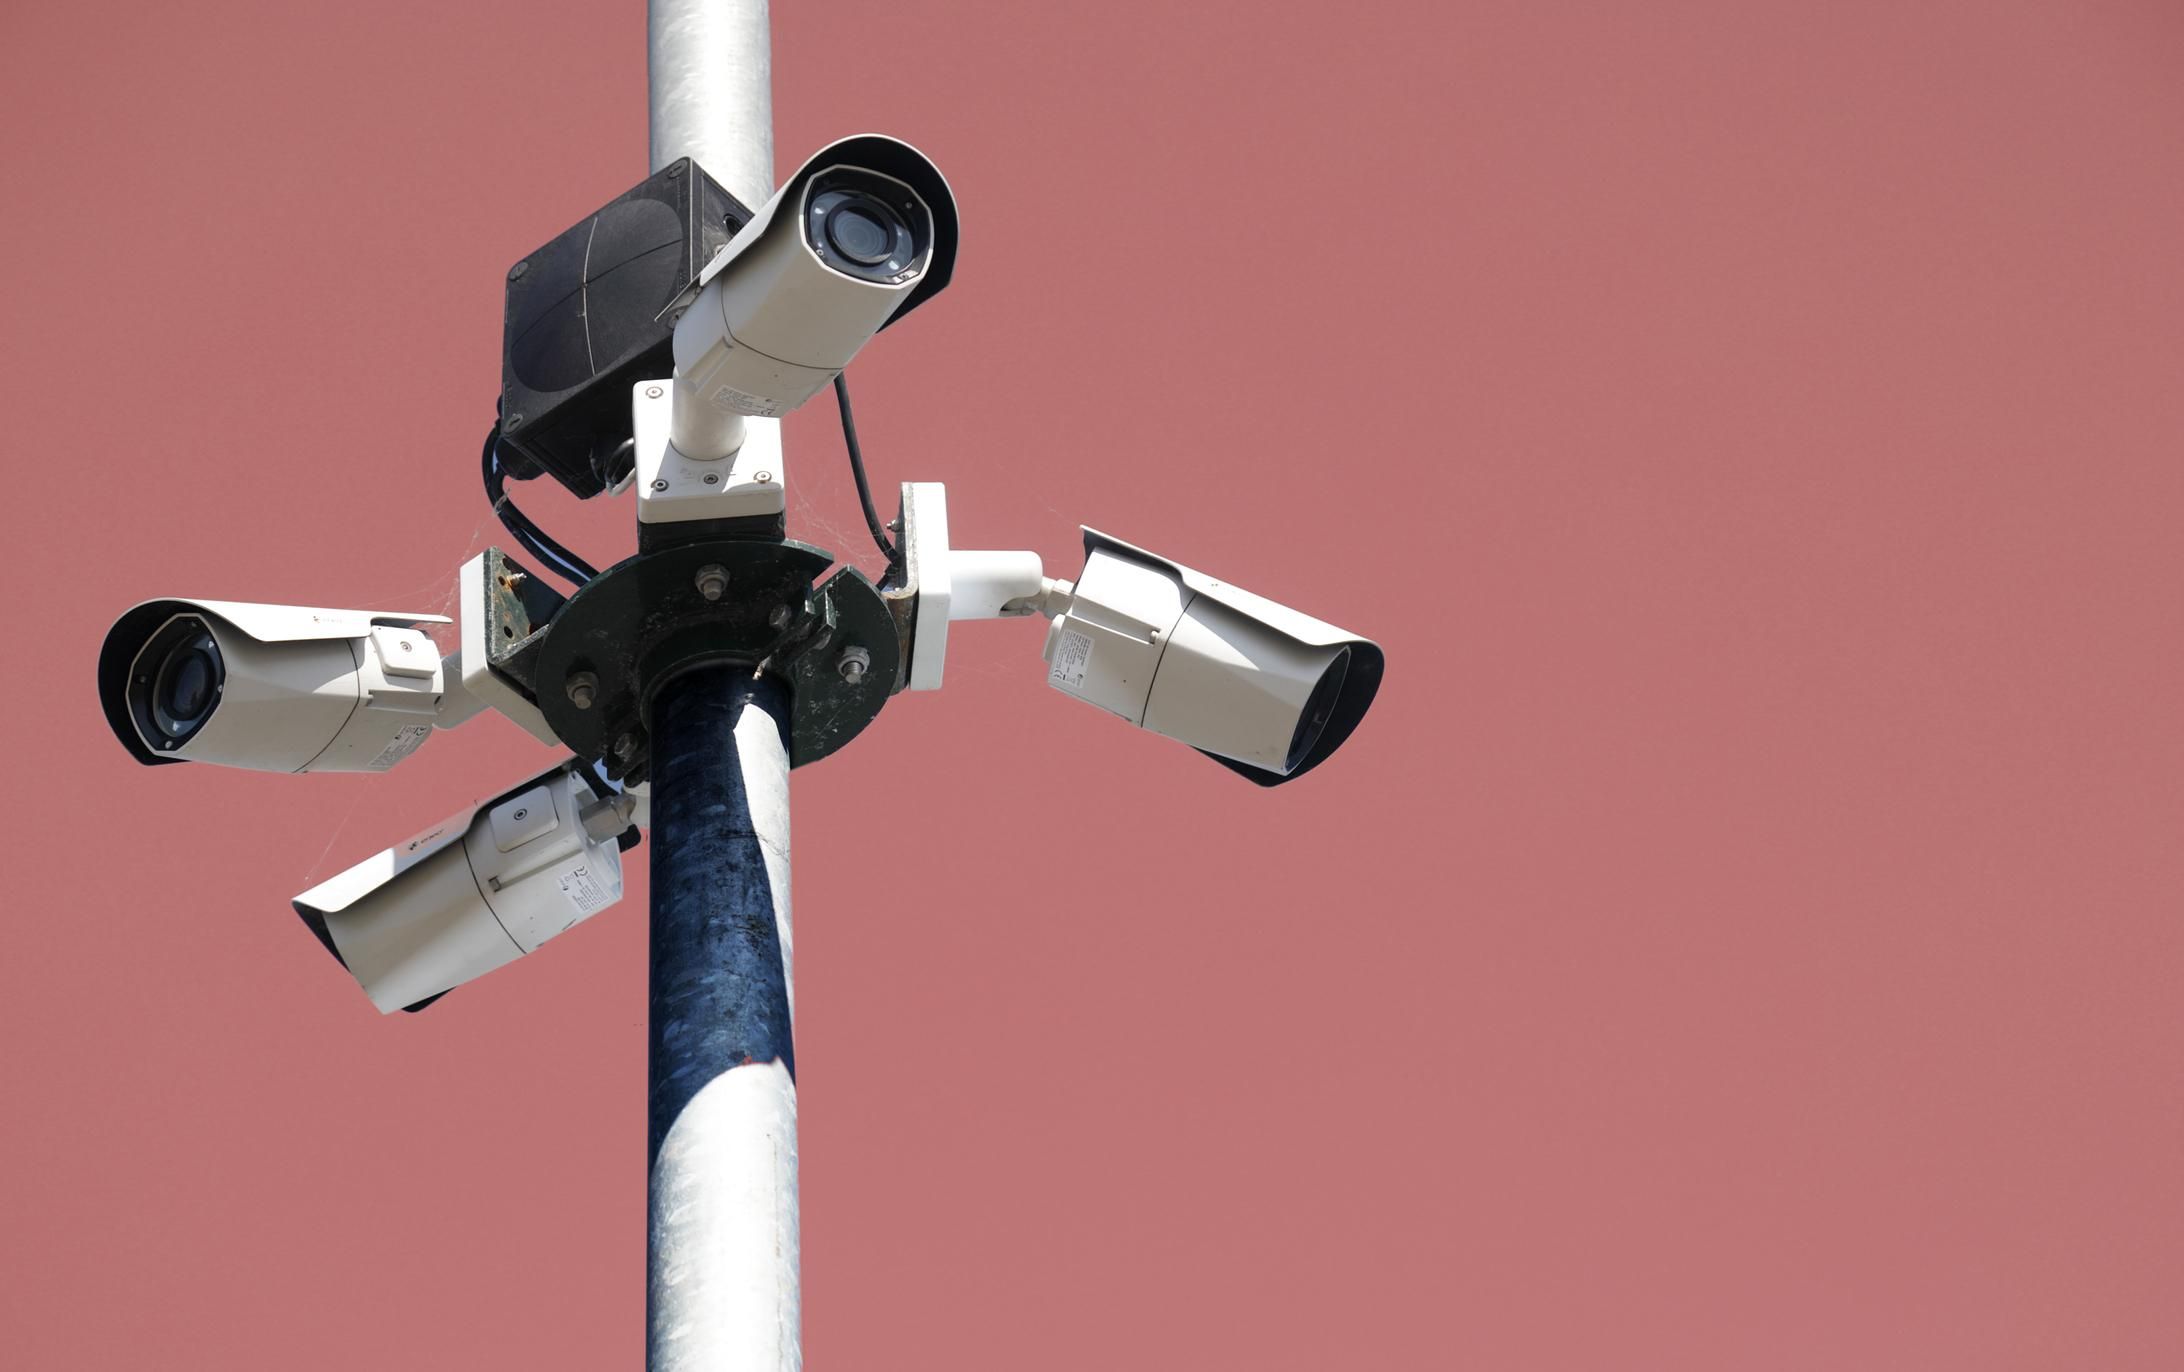 Previous administrations have misled the public and Congress about the extent of spying on Americans without congressional authorization or a court order. (Photo: Getty/Stock Photo)